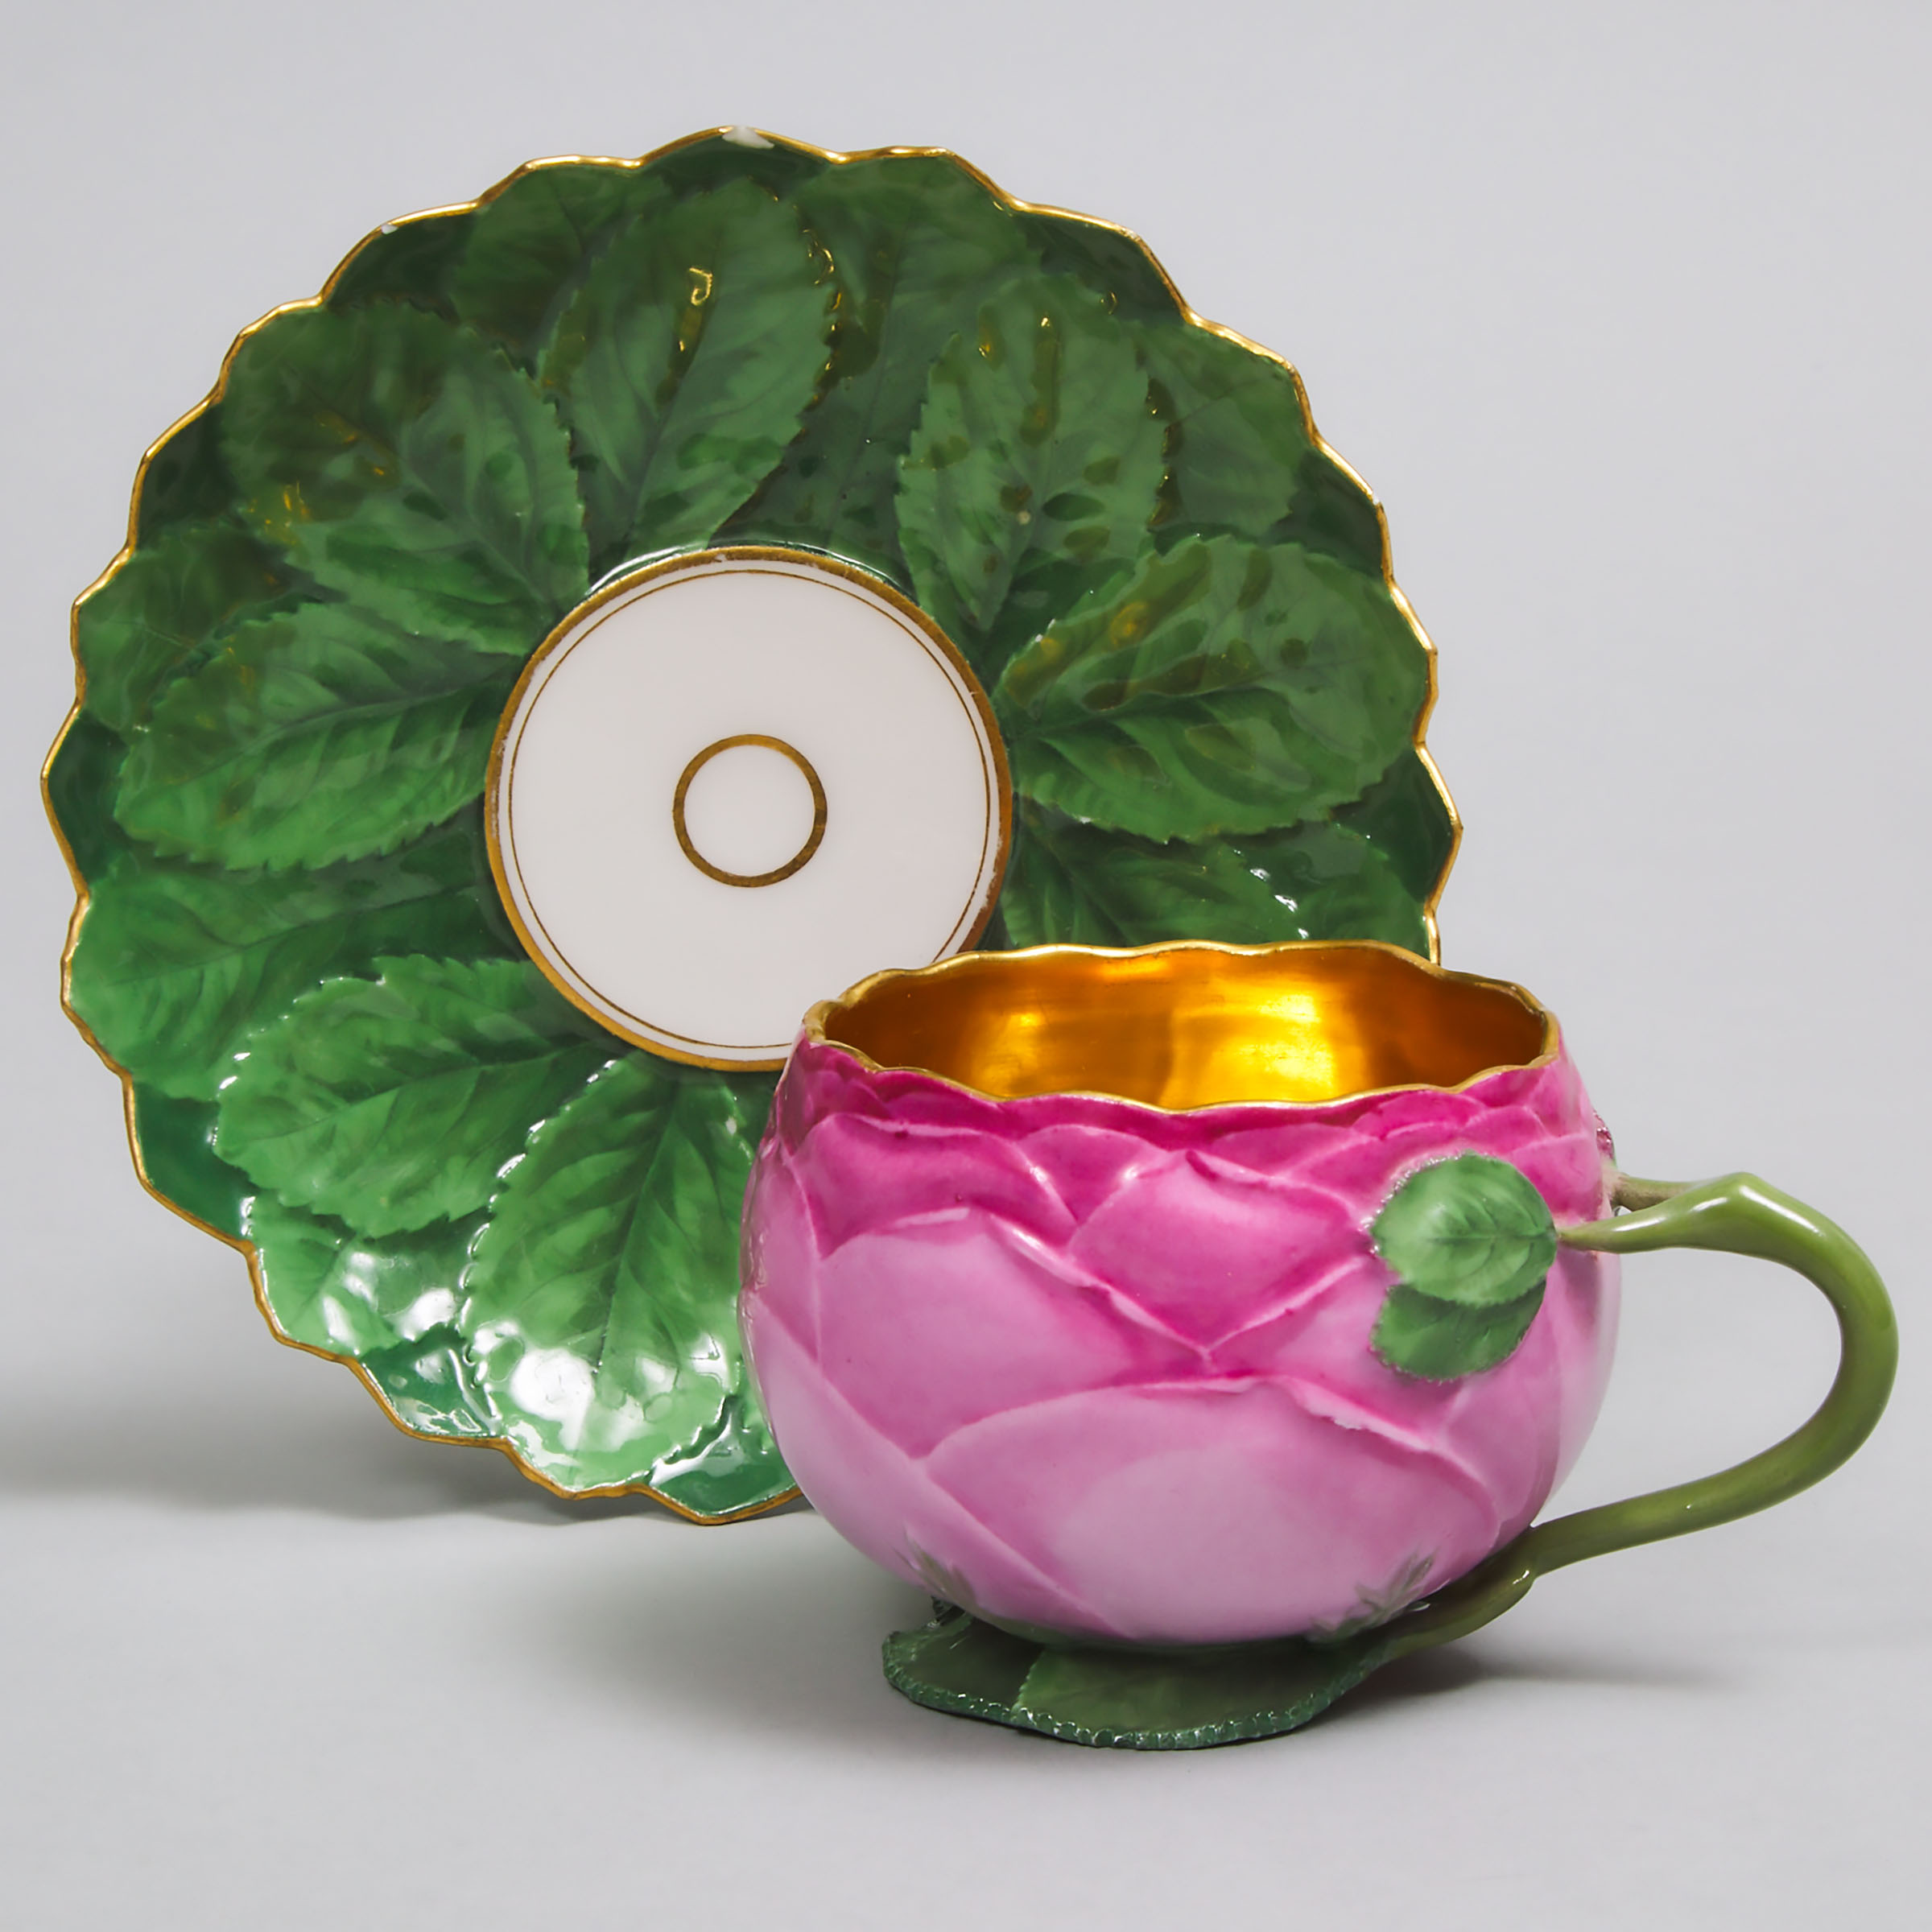 Meissen Moulded Rose-Form Cup and Saucer, 19th century